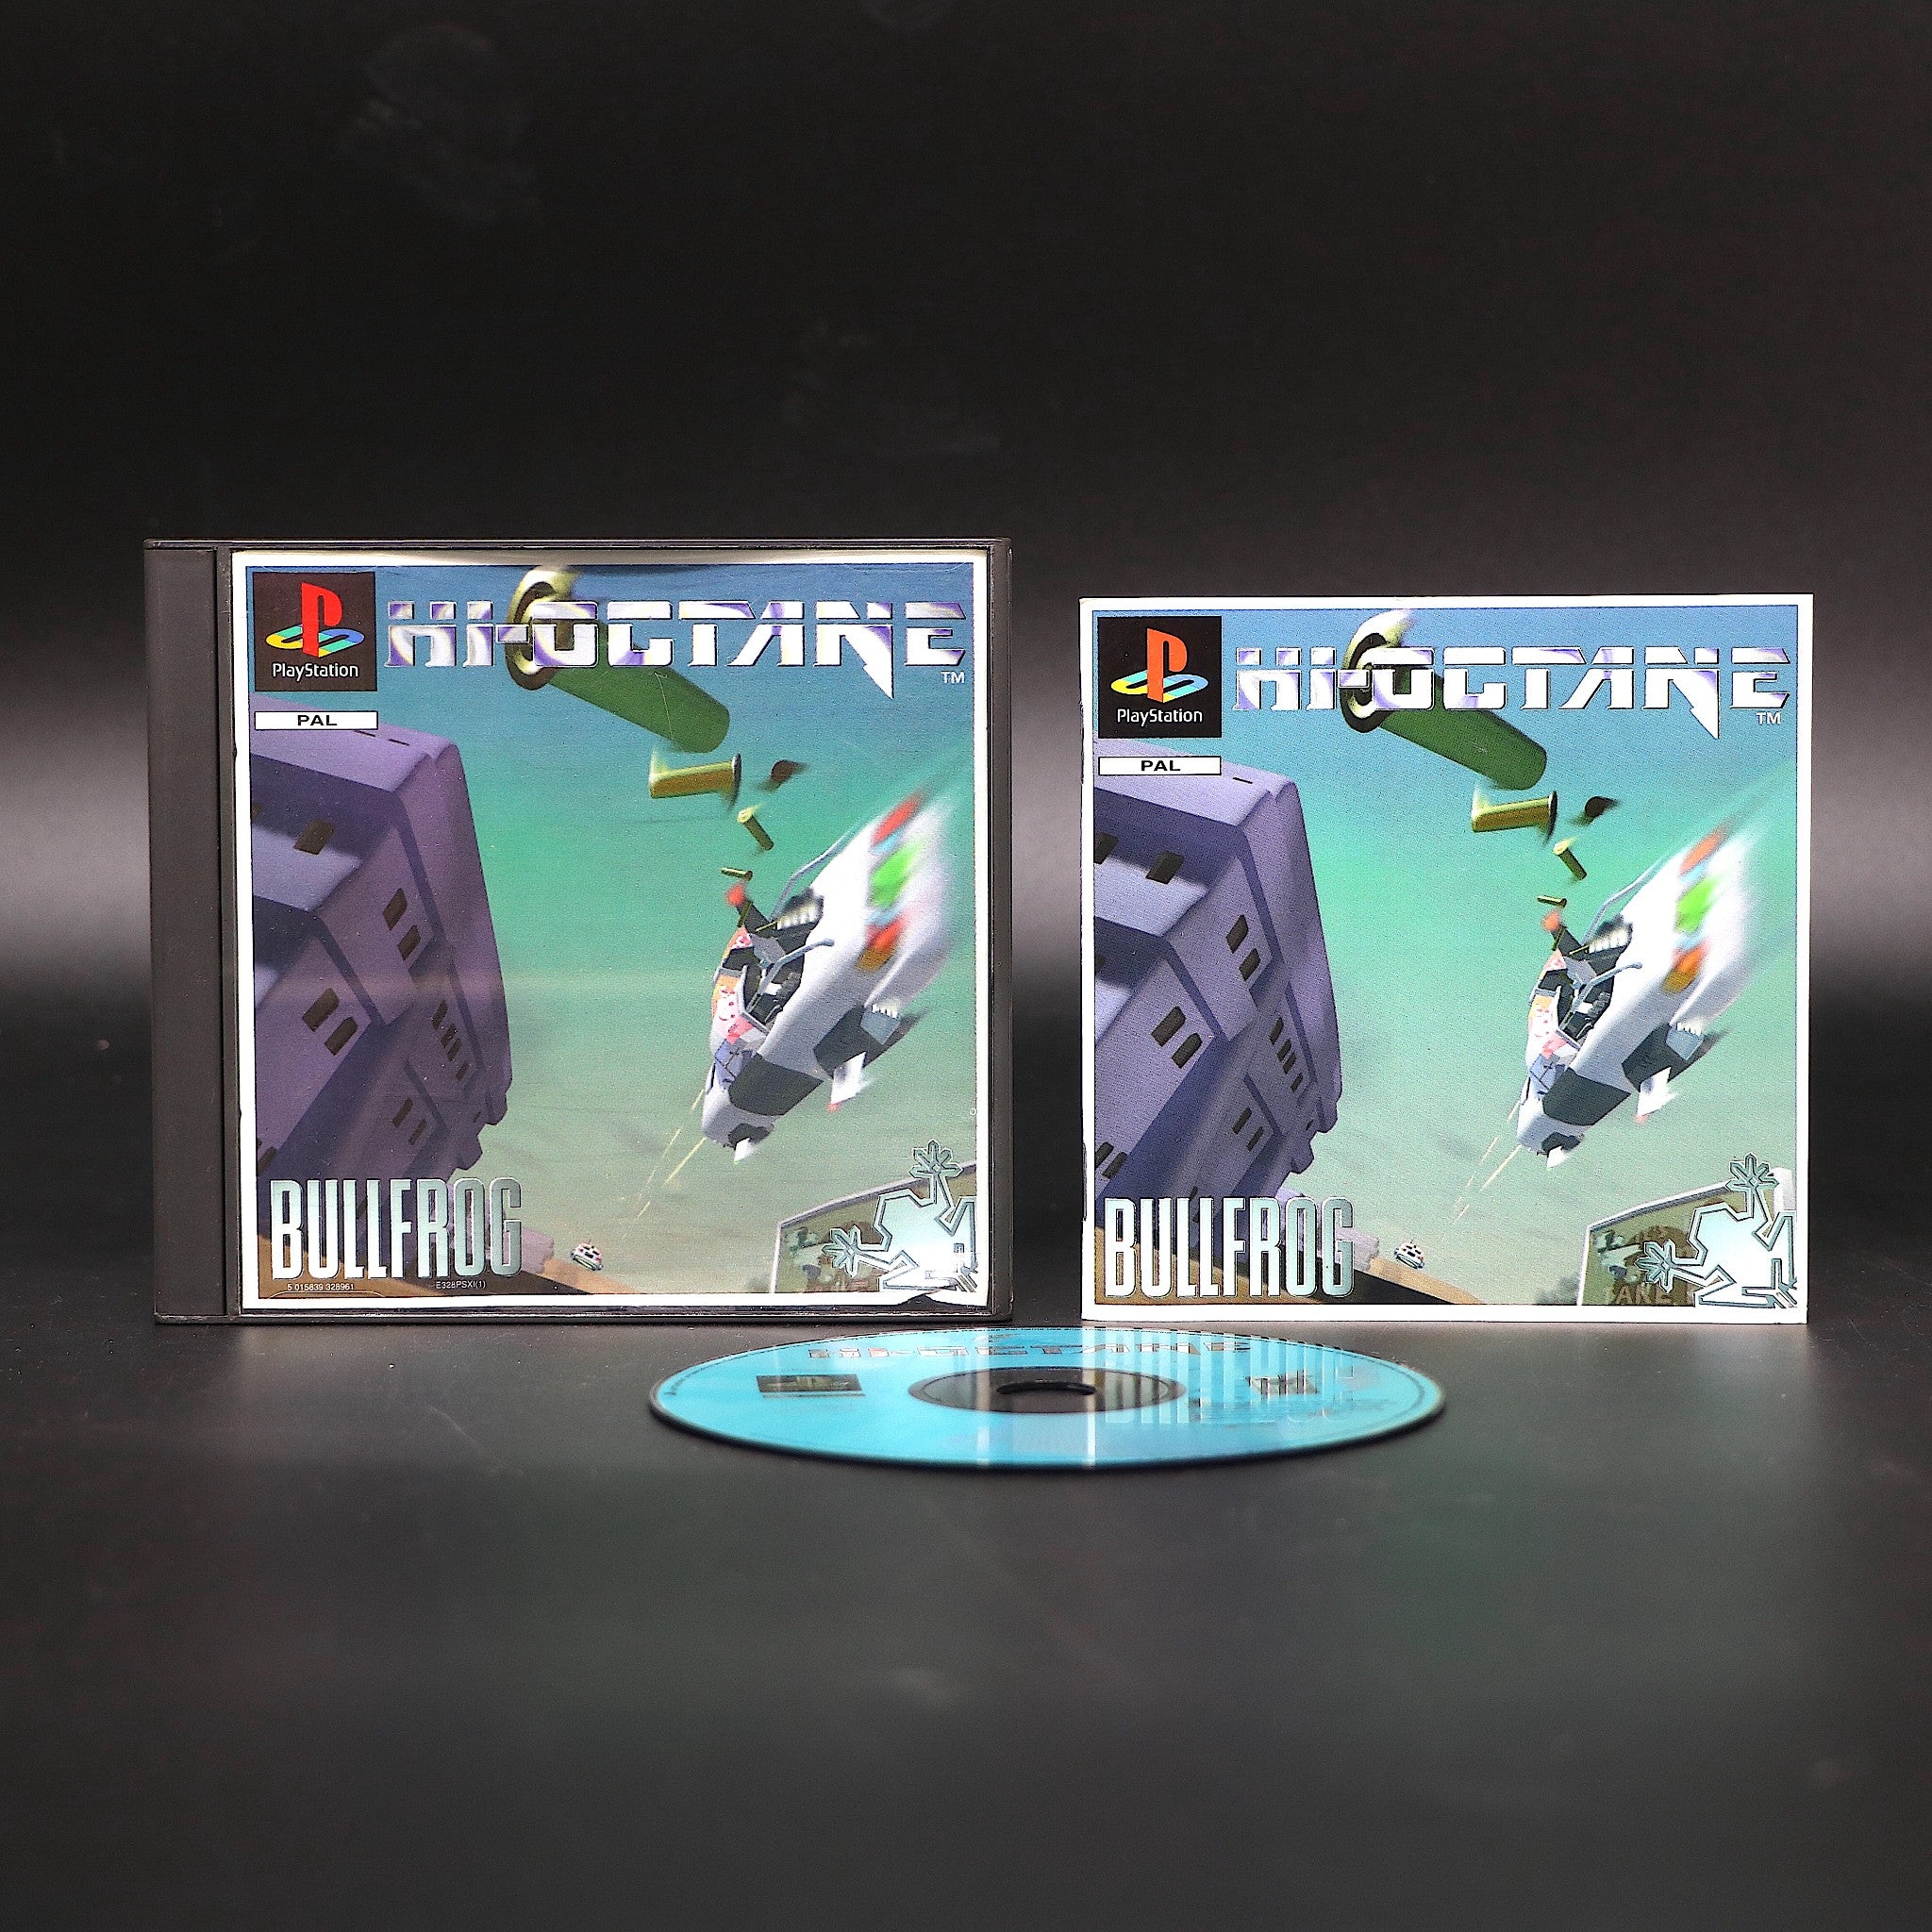 Hi-Octane | Sony Playstation PSONE PS1 Game | Collectable Condition!